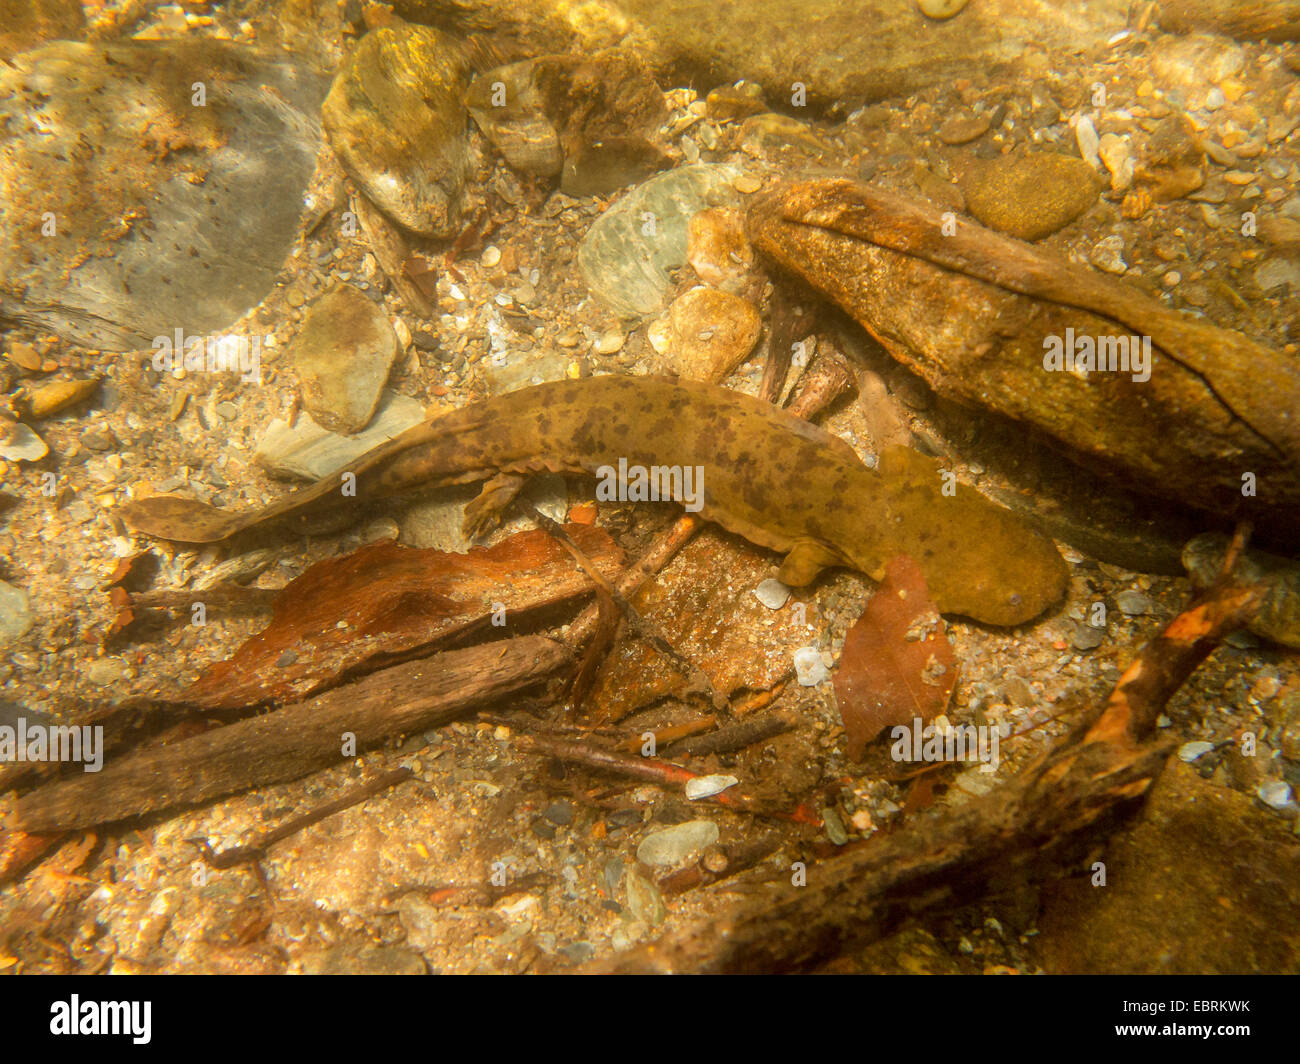 hellbender (Cryptobranchus alleganiensis), on the river ground, USA, Tennessee, Little River Stock Photo